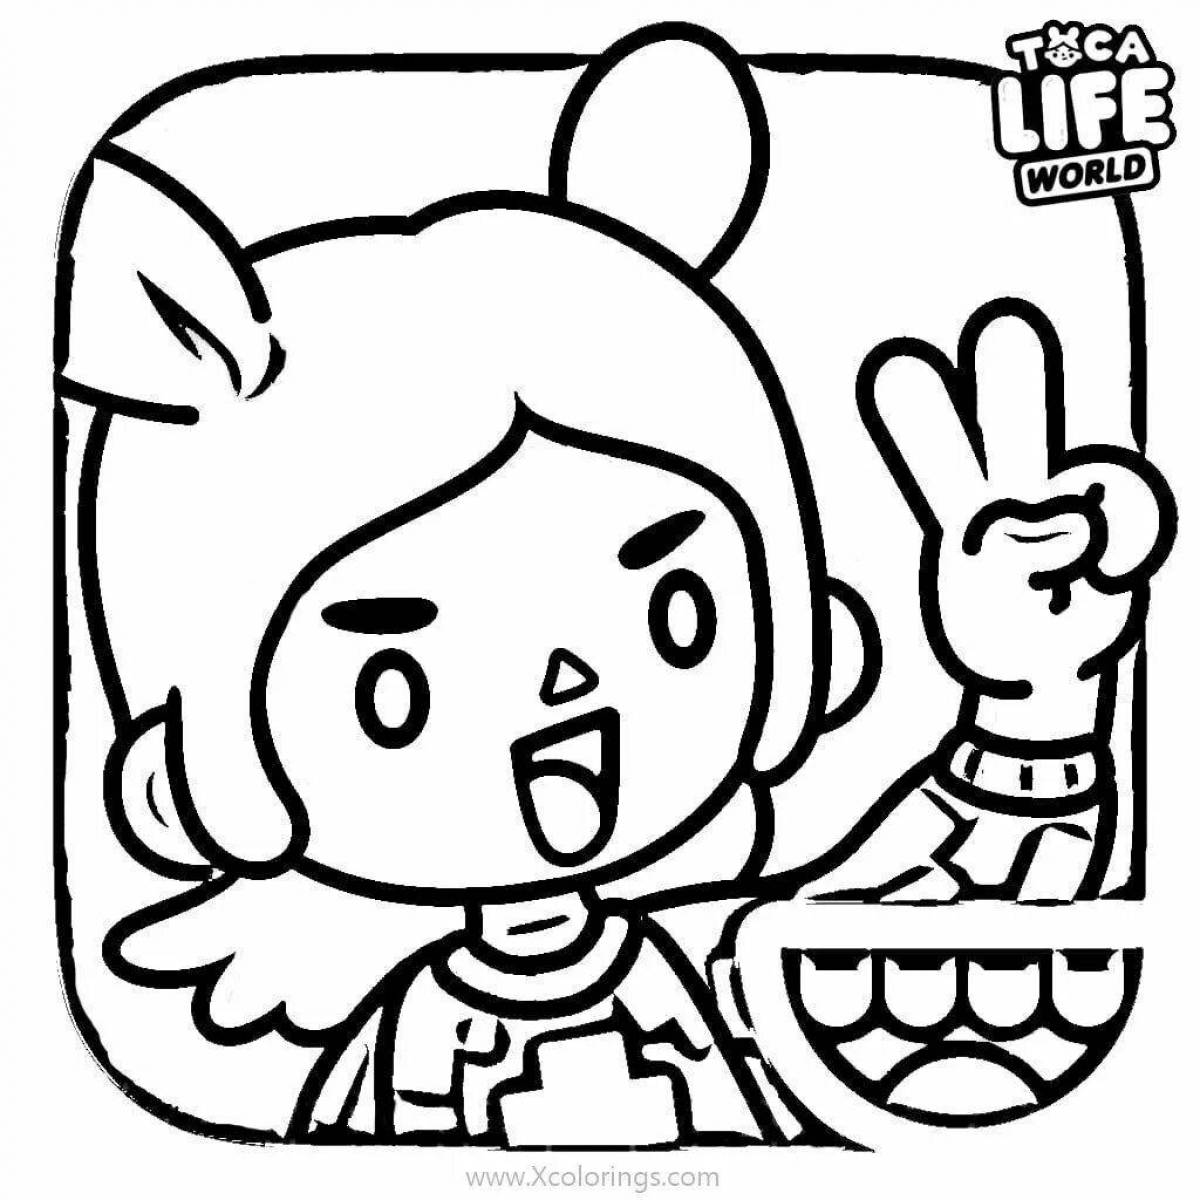 Toca life world live coloring page